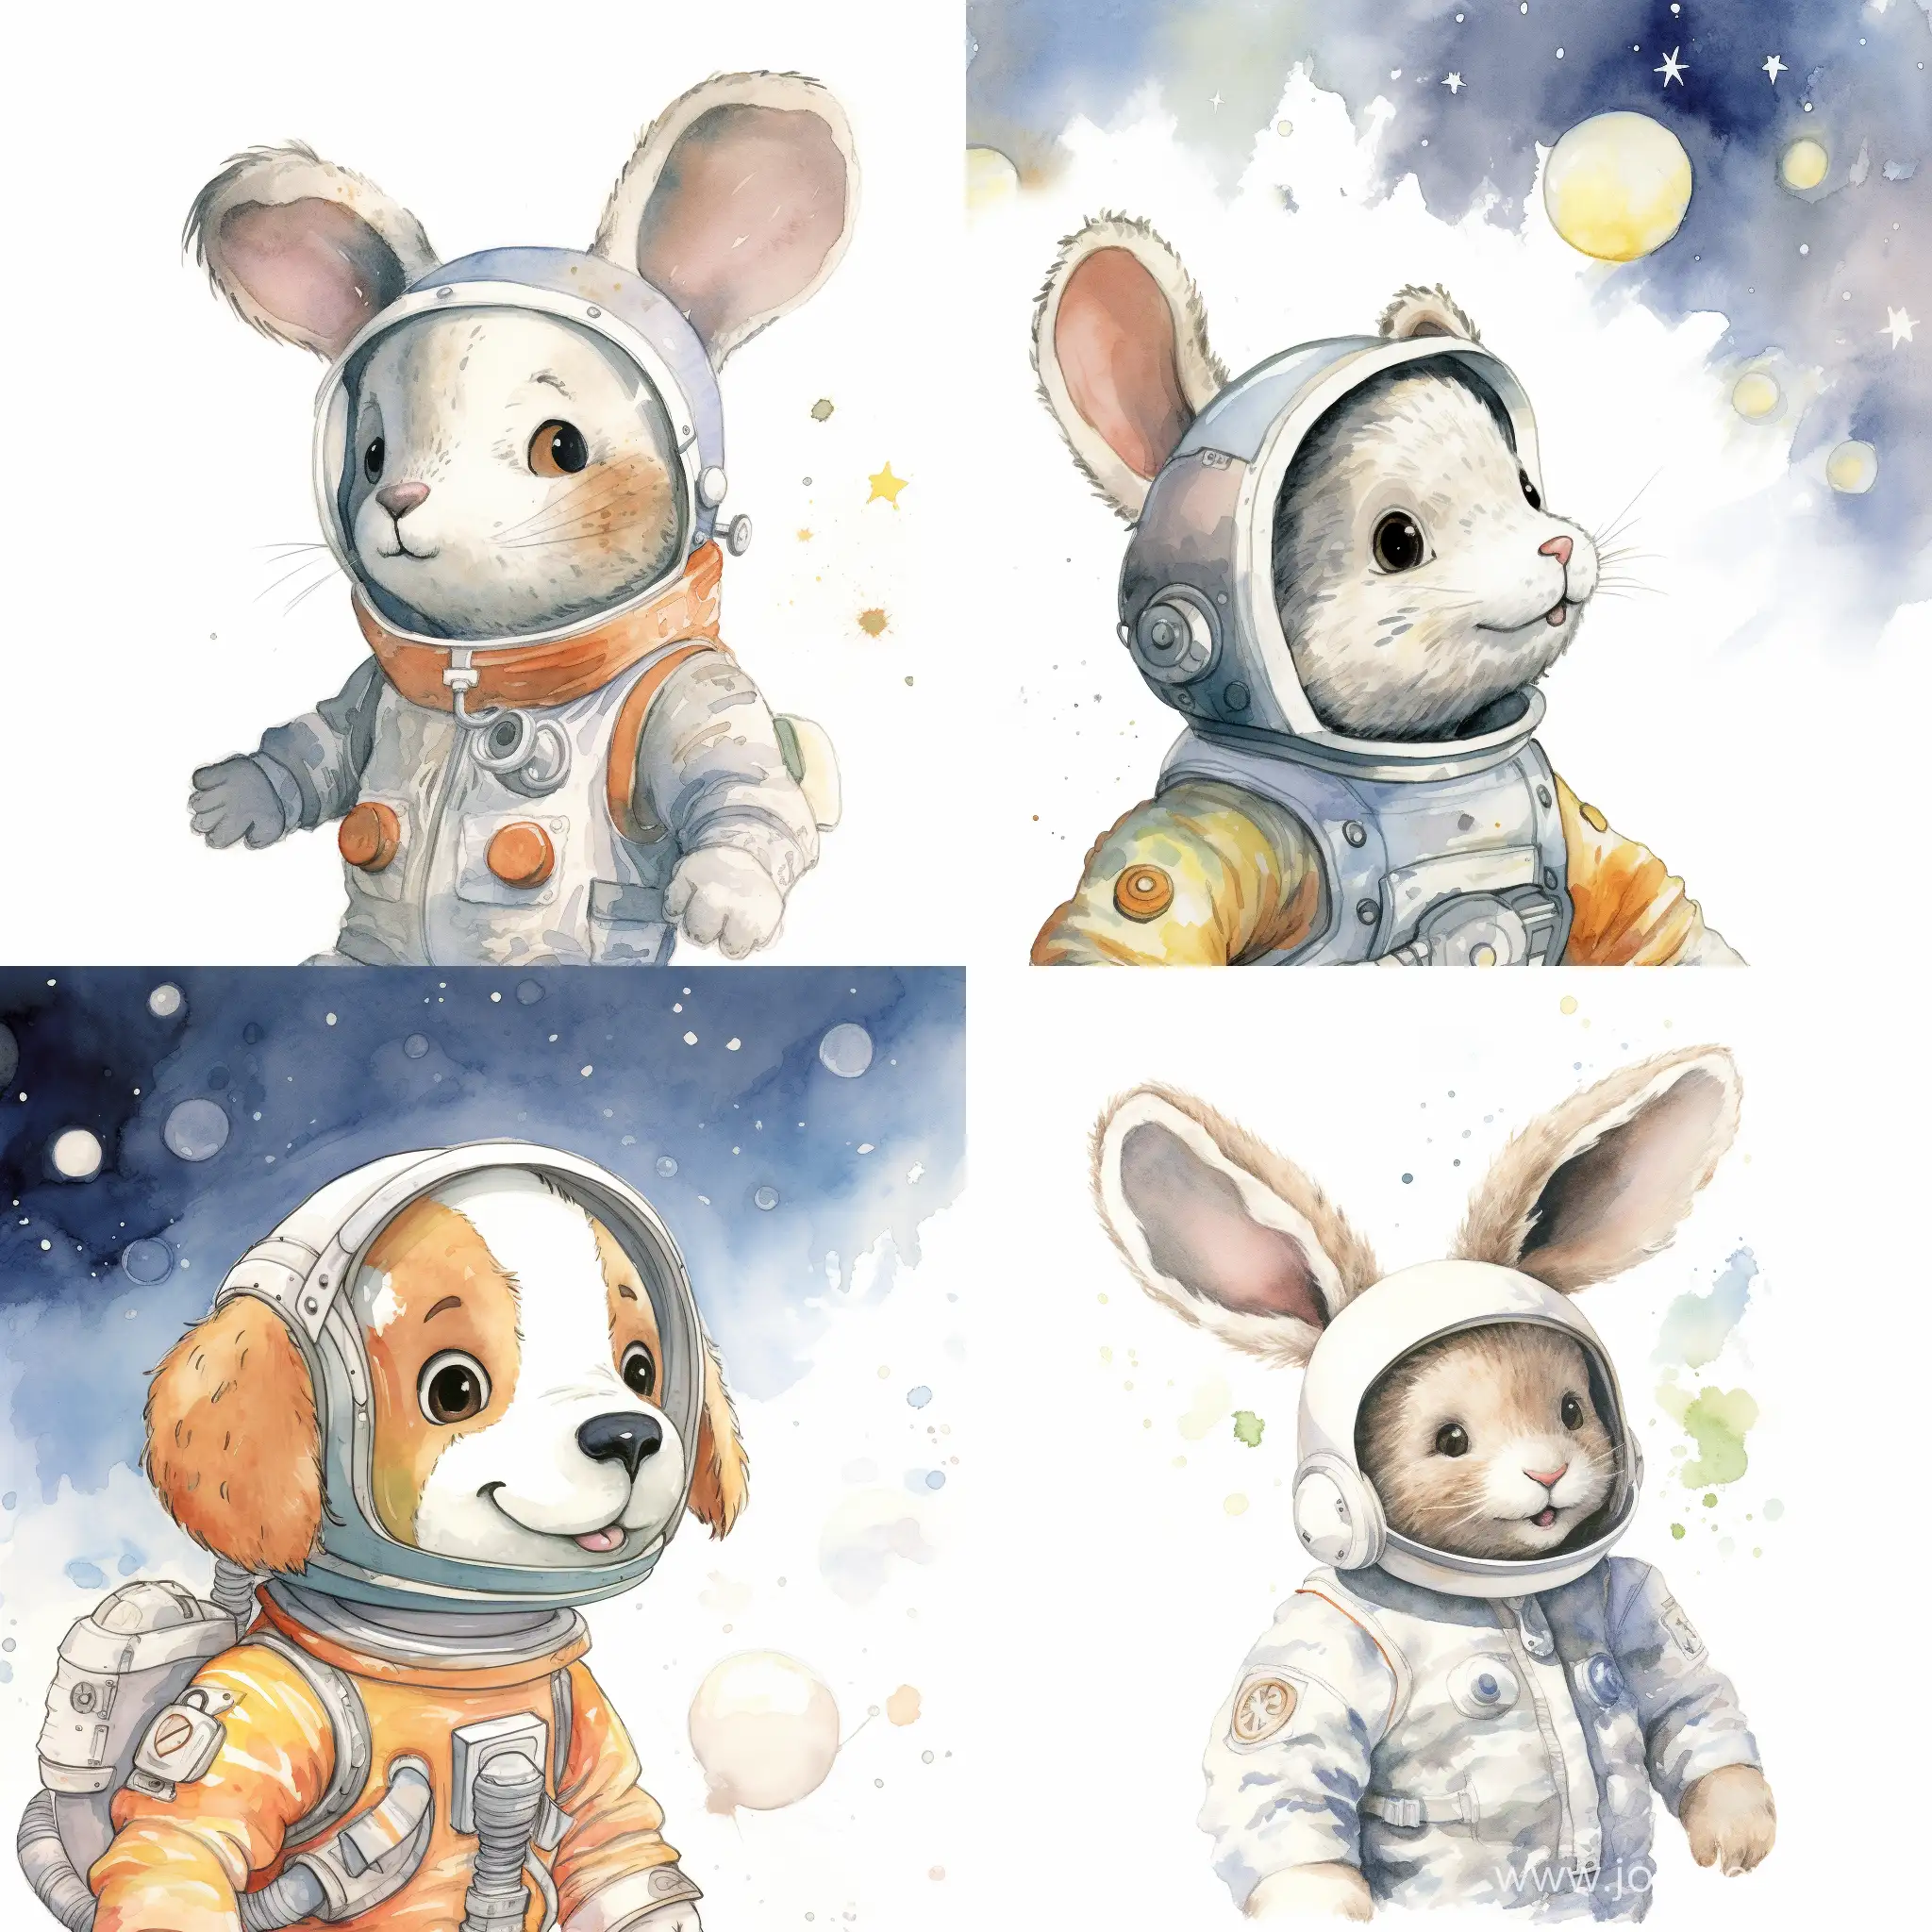 Milo-the-Mouse-in-Space-Whimsical-Childrens-Book-Illustration